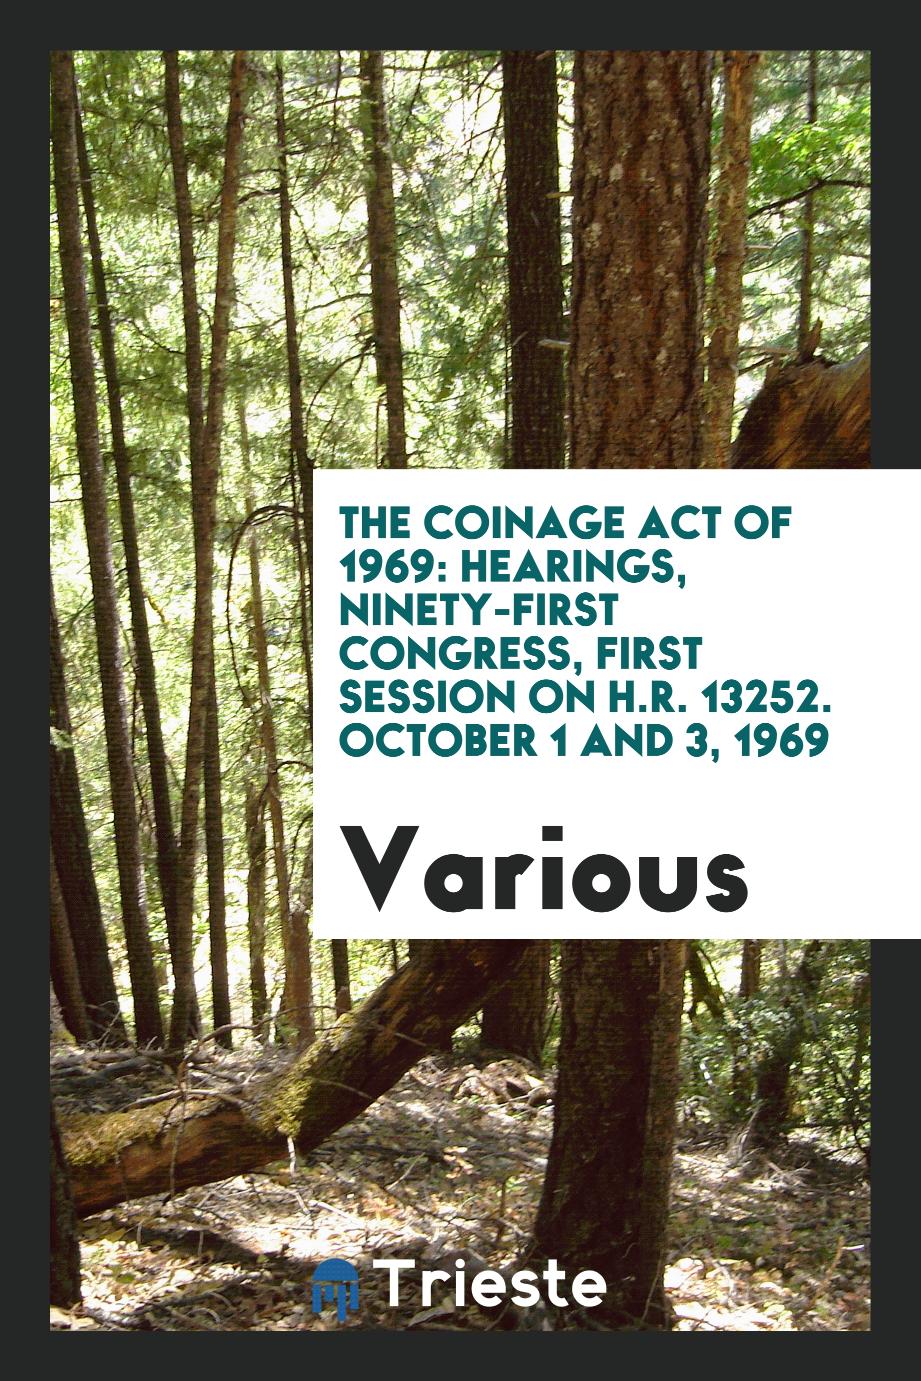 The Coinage Act of 1969: Hearings, Ninety-First Congress, First Session on H.R. 13252. October 1 and 3, 1969